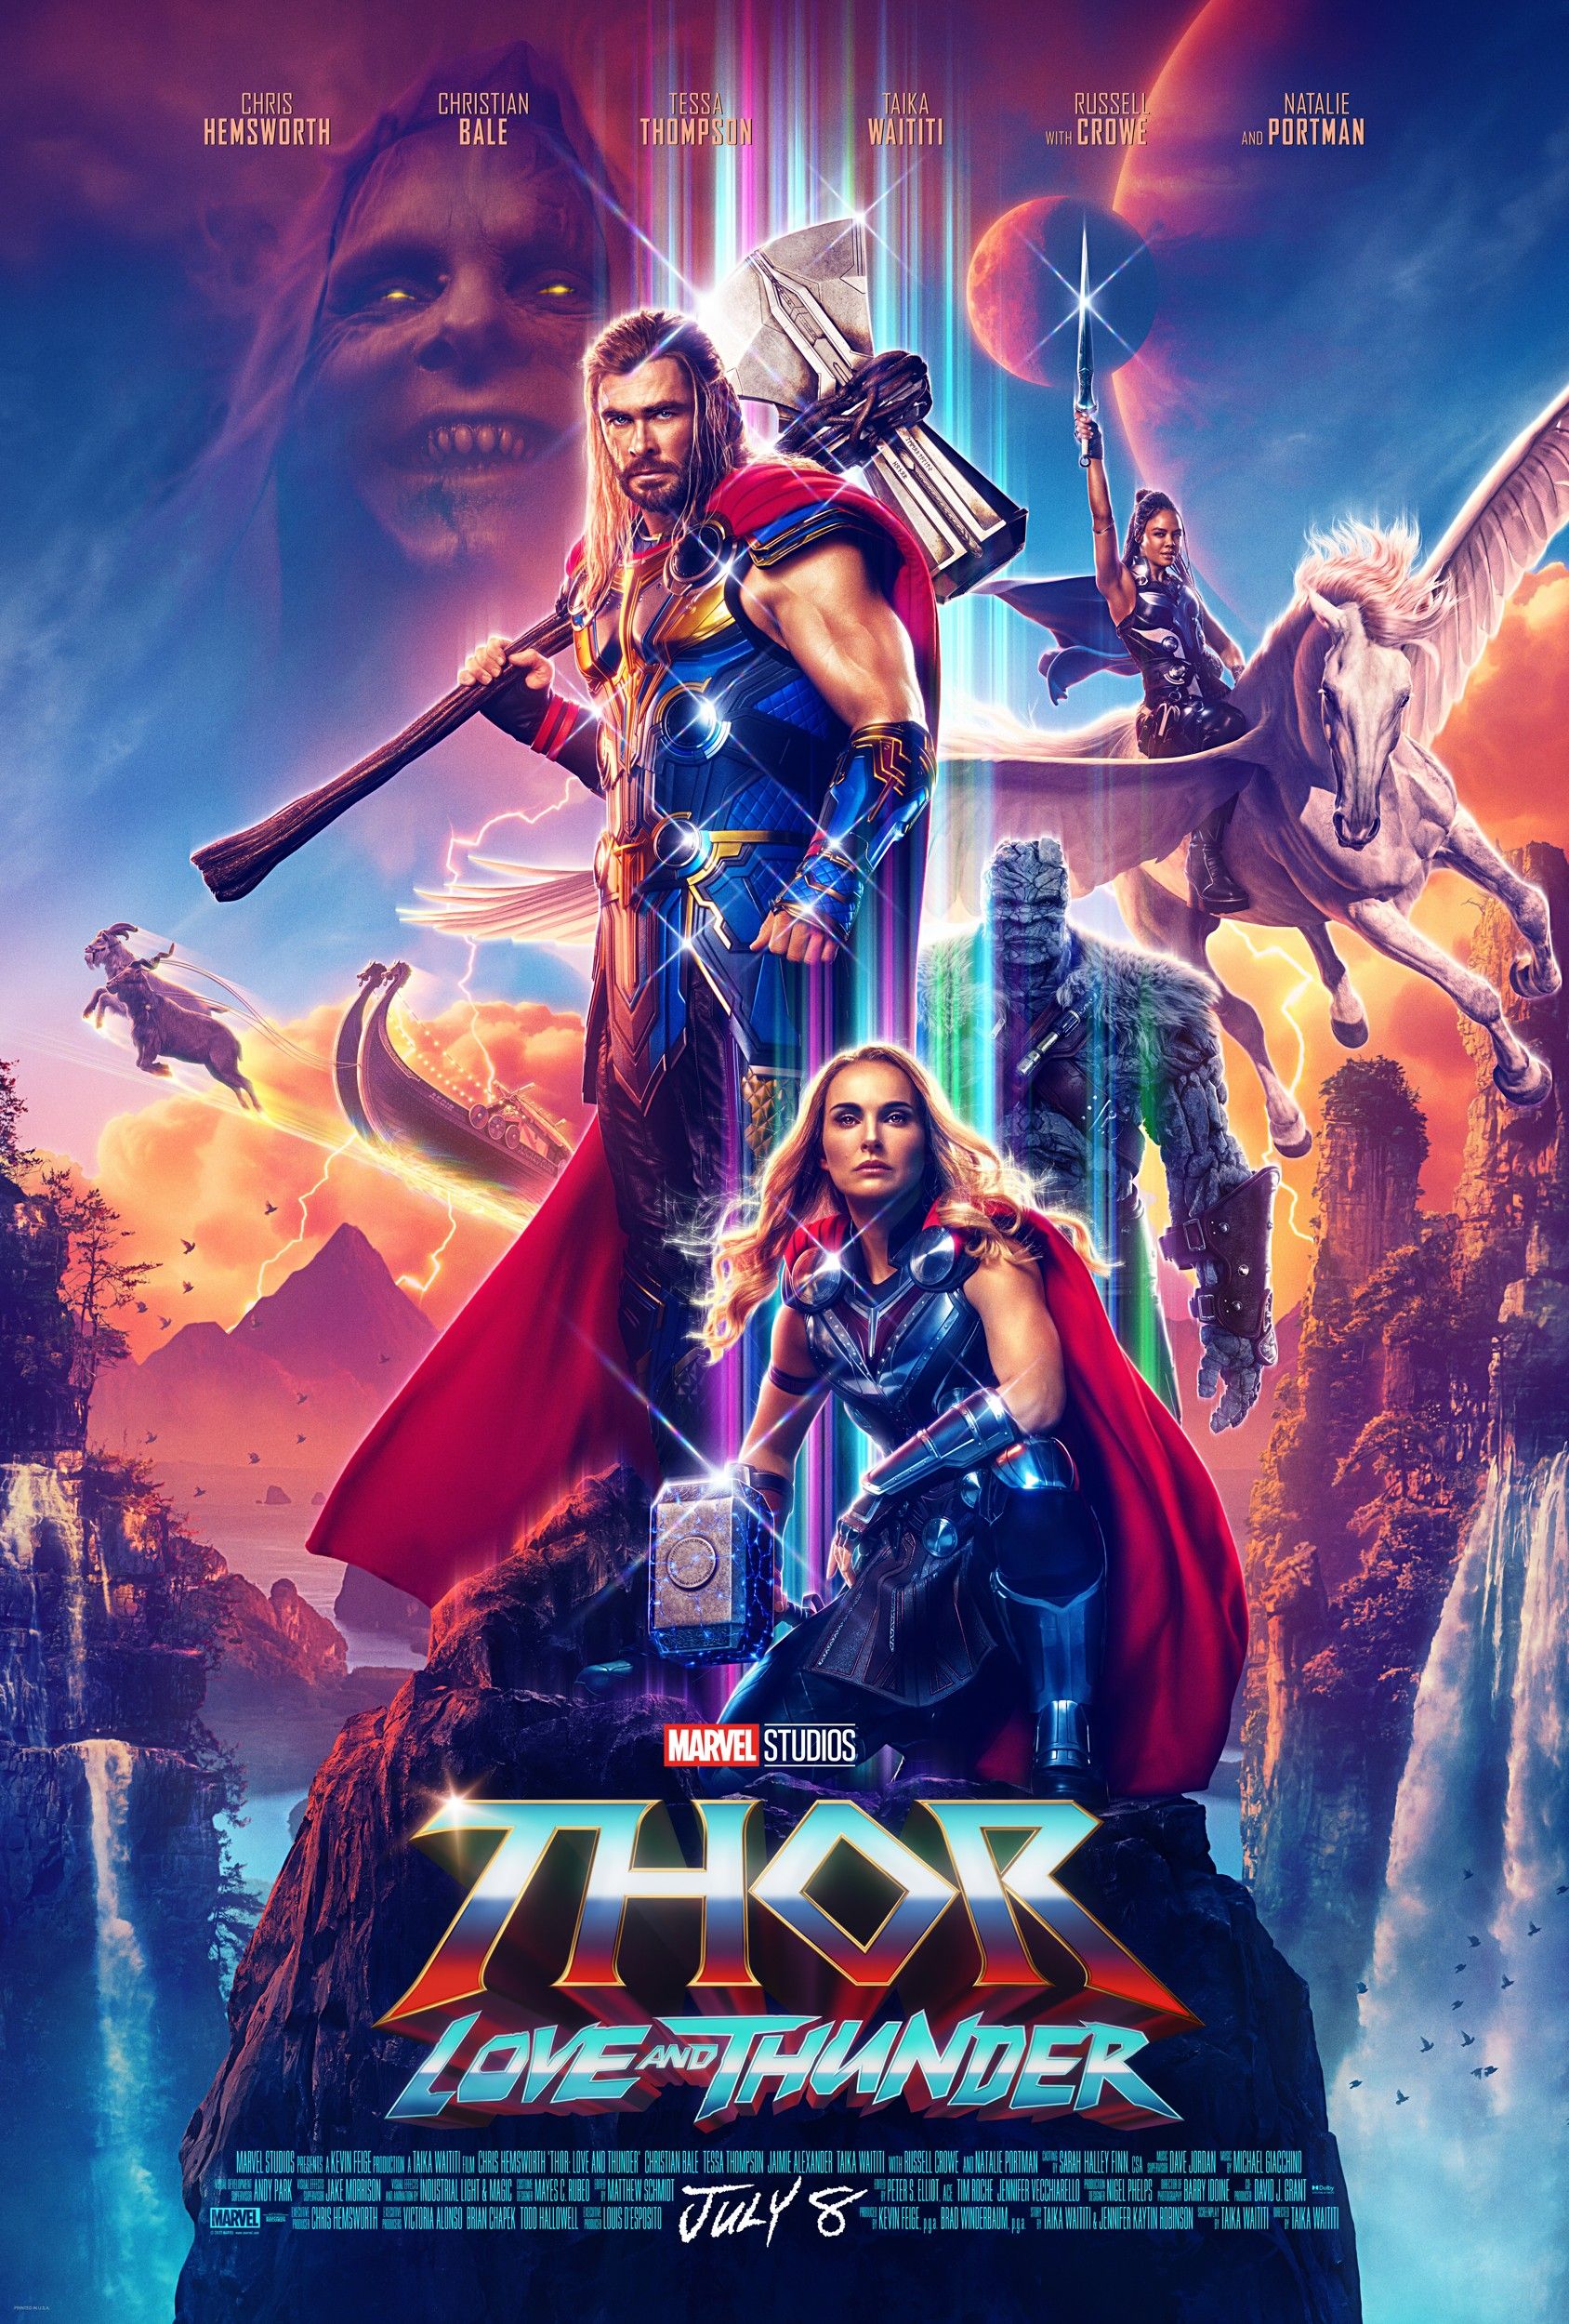 Gorr Looms Large In New Thor: Love & Thunder Poster